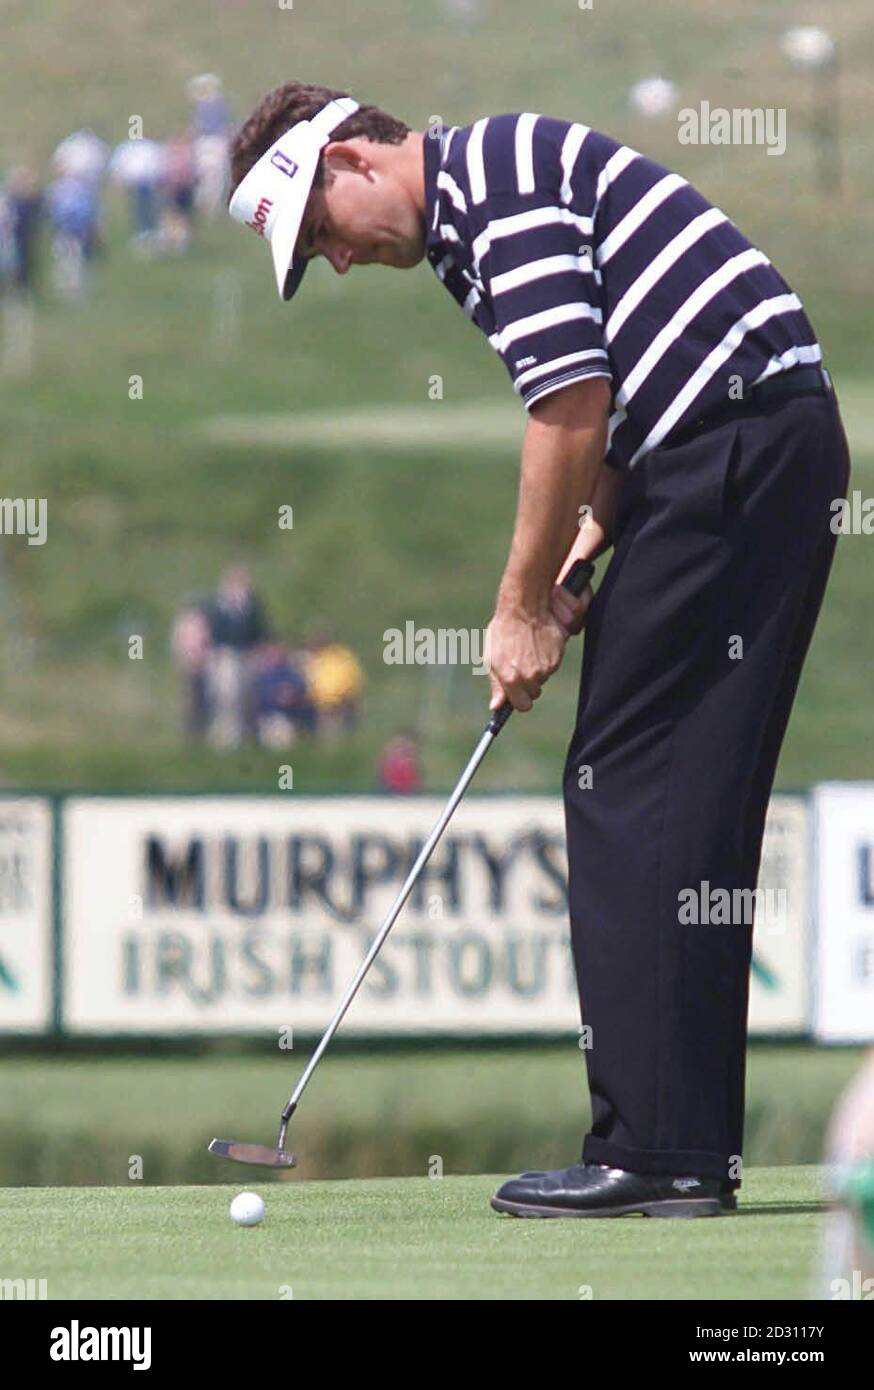 Ireland's Padraig Harrington putting on the 9th green during the opening  round of the Murphy's Irish Open at Ballybunion, Co. Kerry Stock Photo -  Alamy